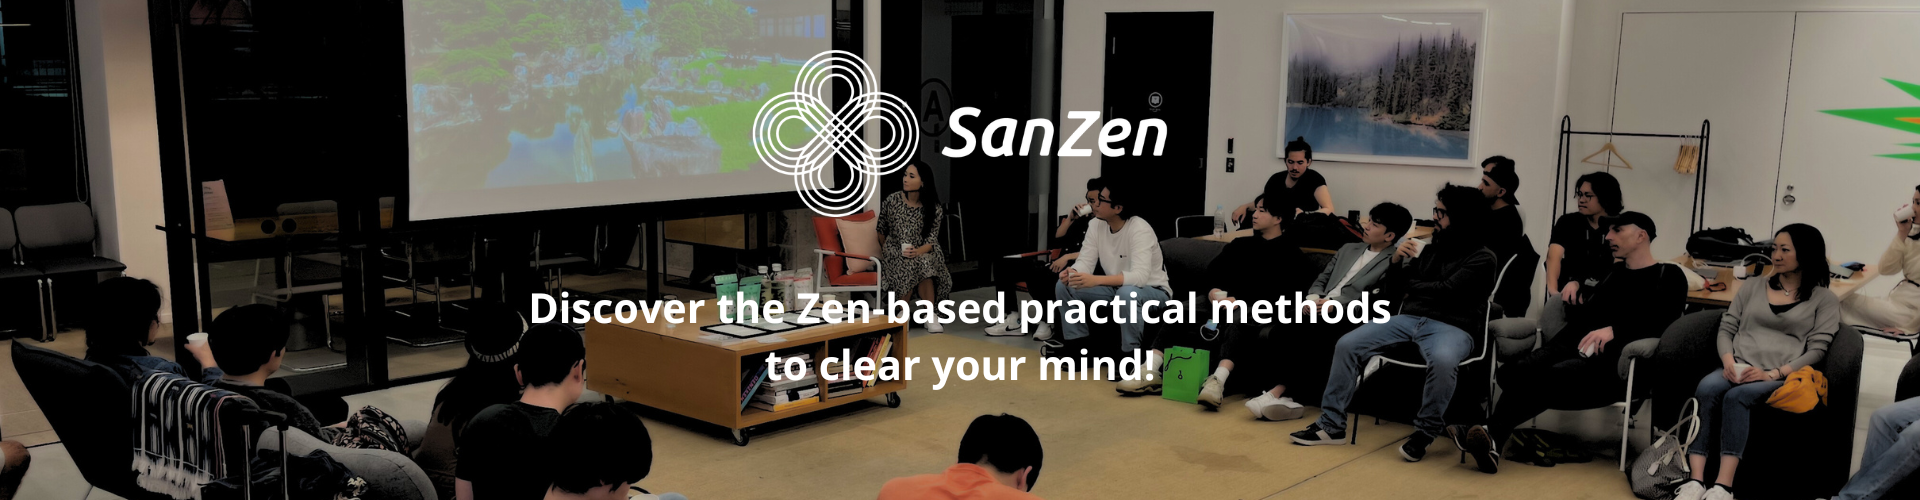 Study: Zen Meditation Really Does Clear the Mind